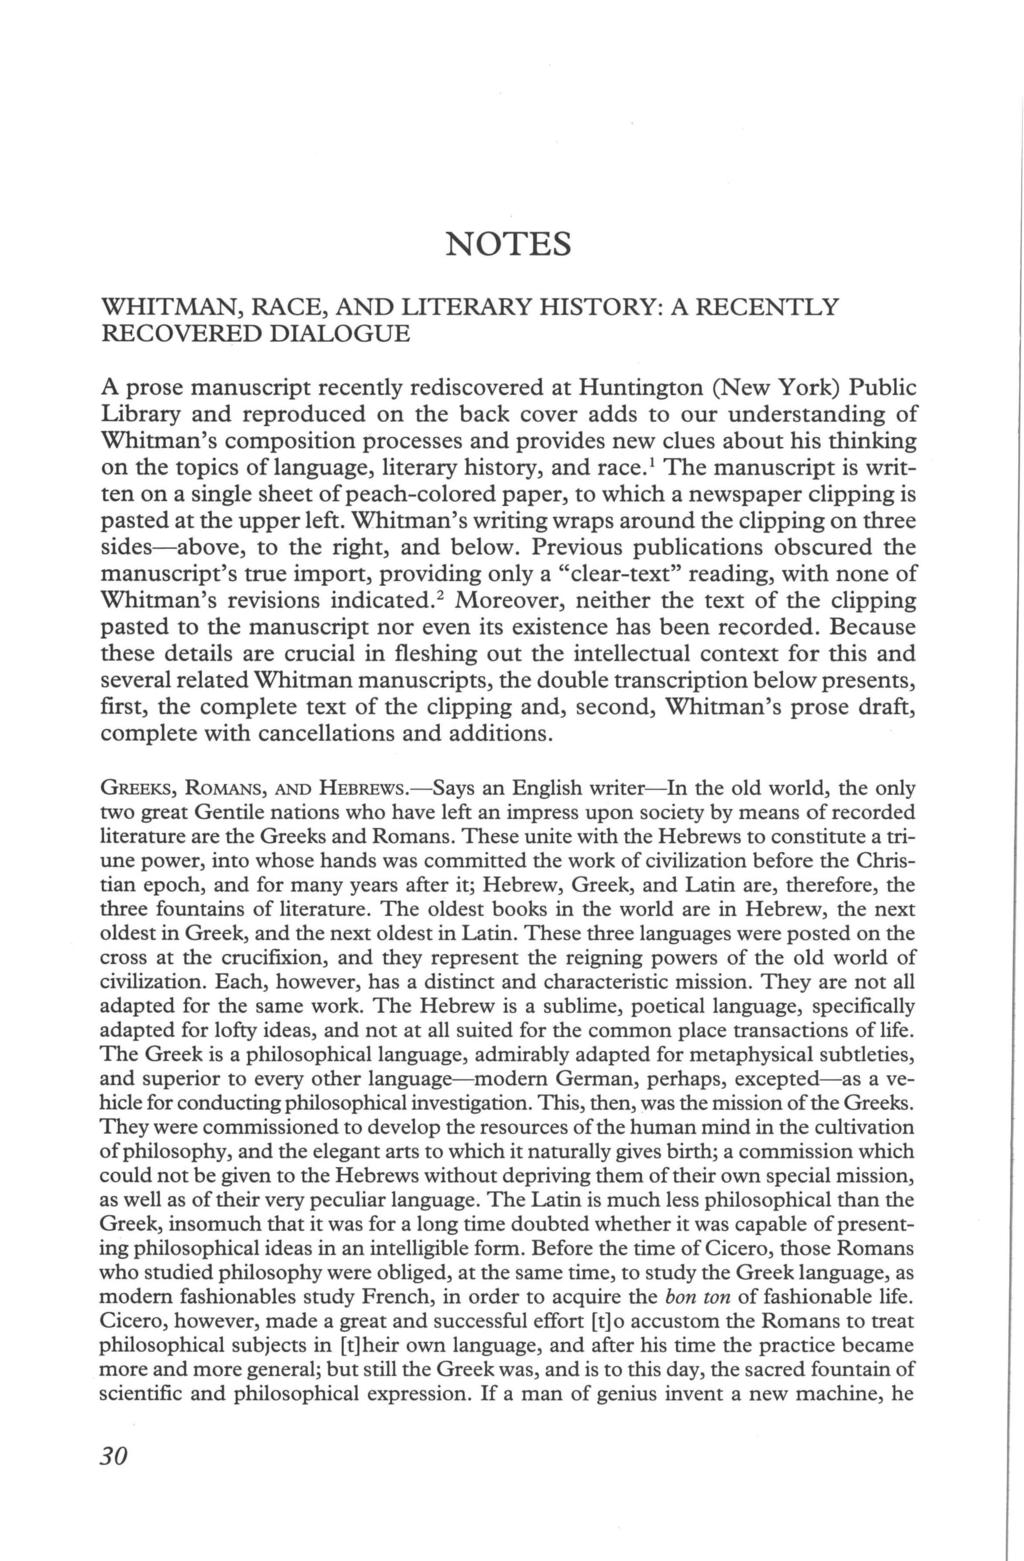 NOTES WHITMAN, RACE, AND LITERARY HISTORY: A RECENTLY RECOVERED DIALOGUE A prose manuscript recently rediscovered at Huntington (New York) Public Library and reproduced on the back cover adds to our